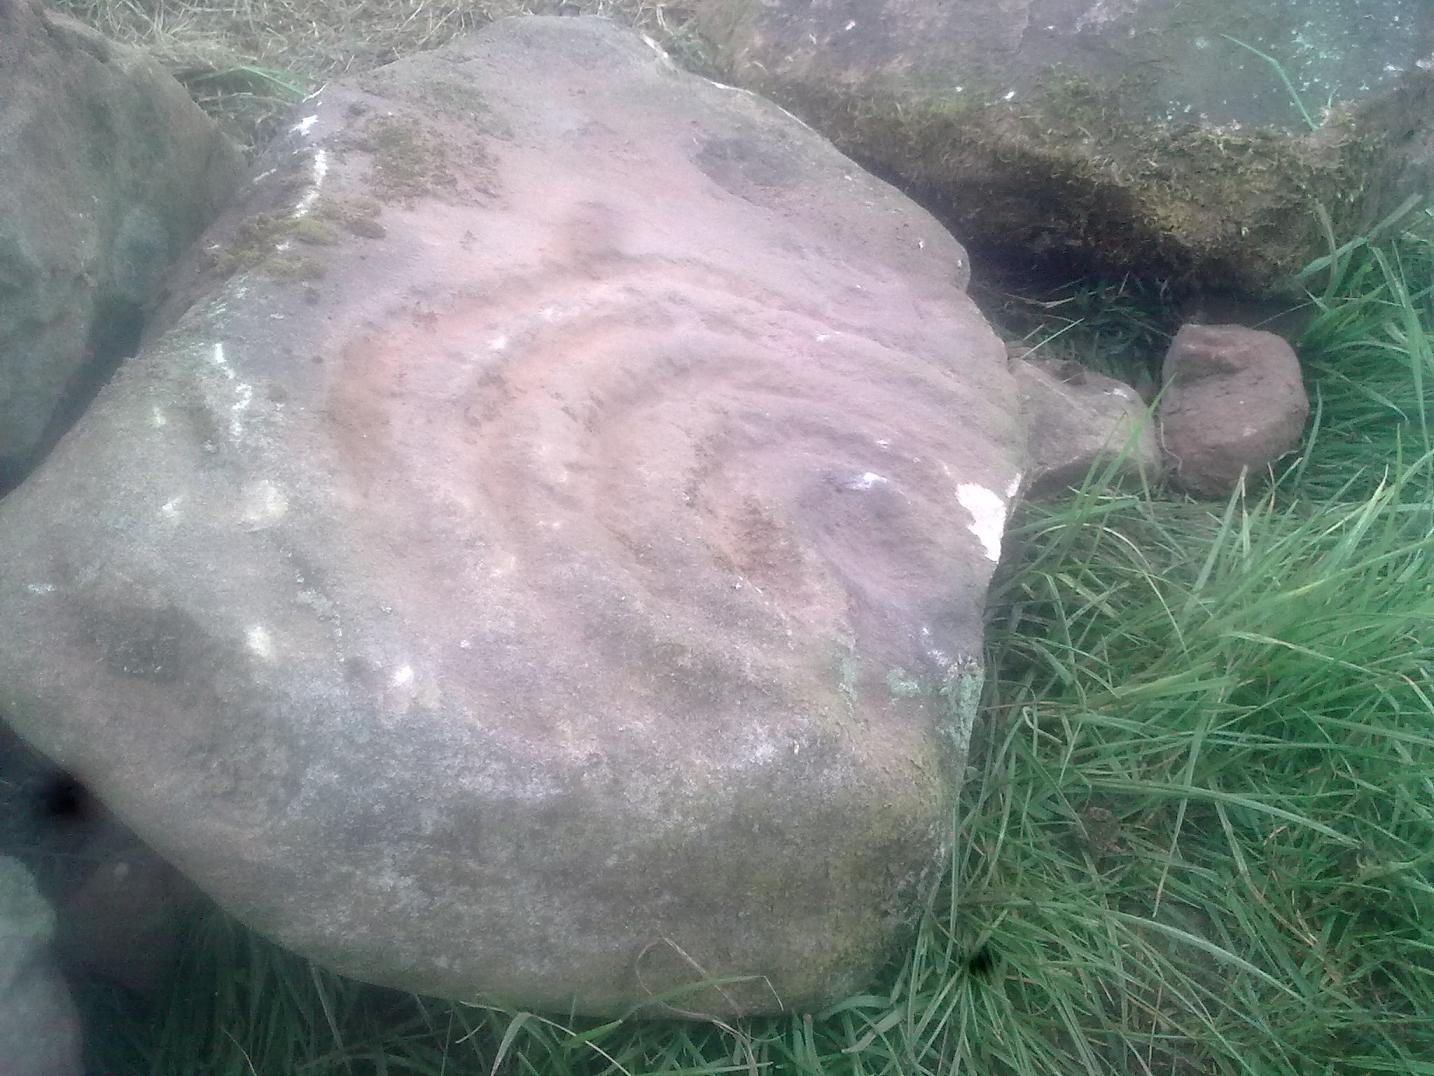 Dunsyre cup and ring marked stone